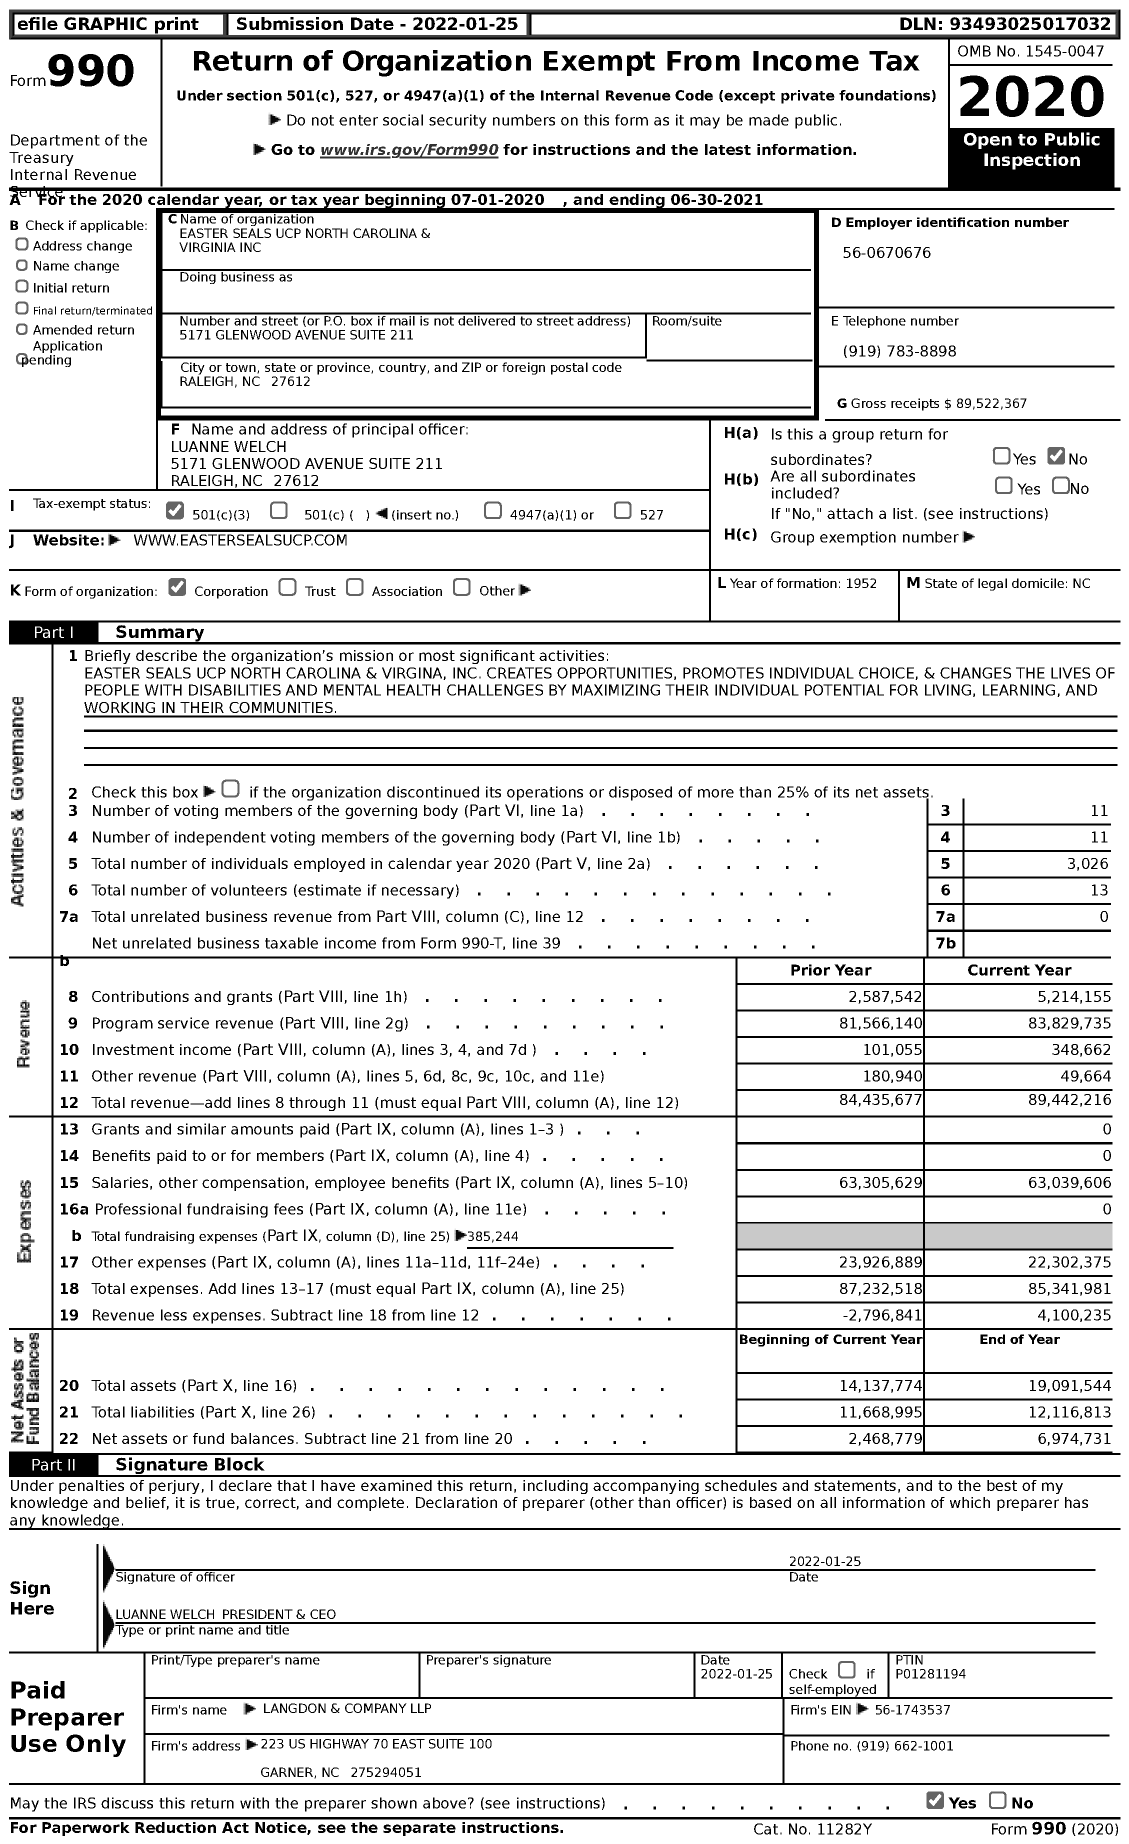 Image of first page of 2020 Form 990 for Easter Seals Ucp North Carolina and Virginia